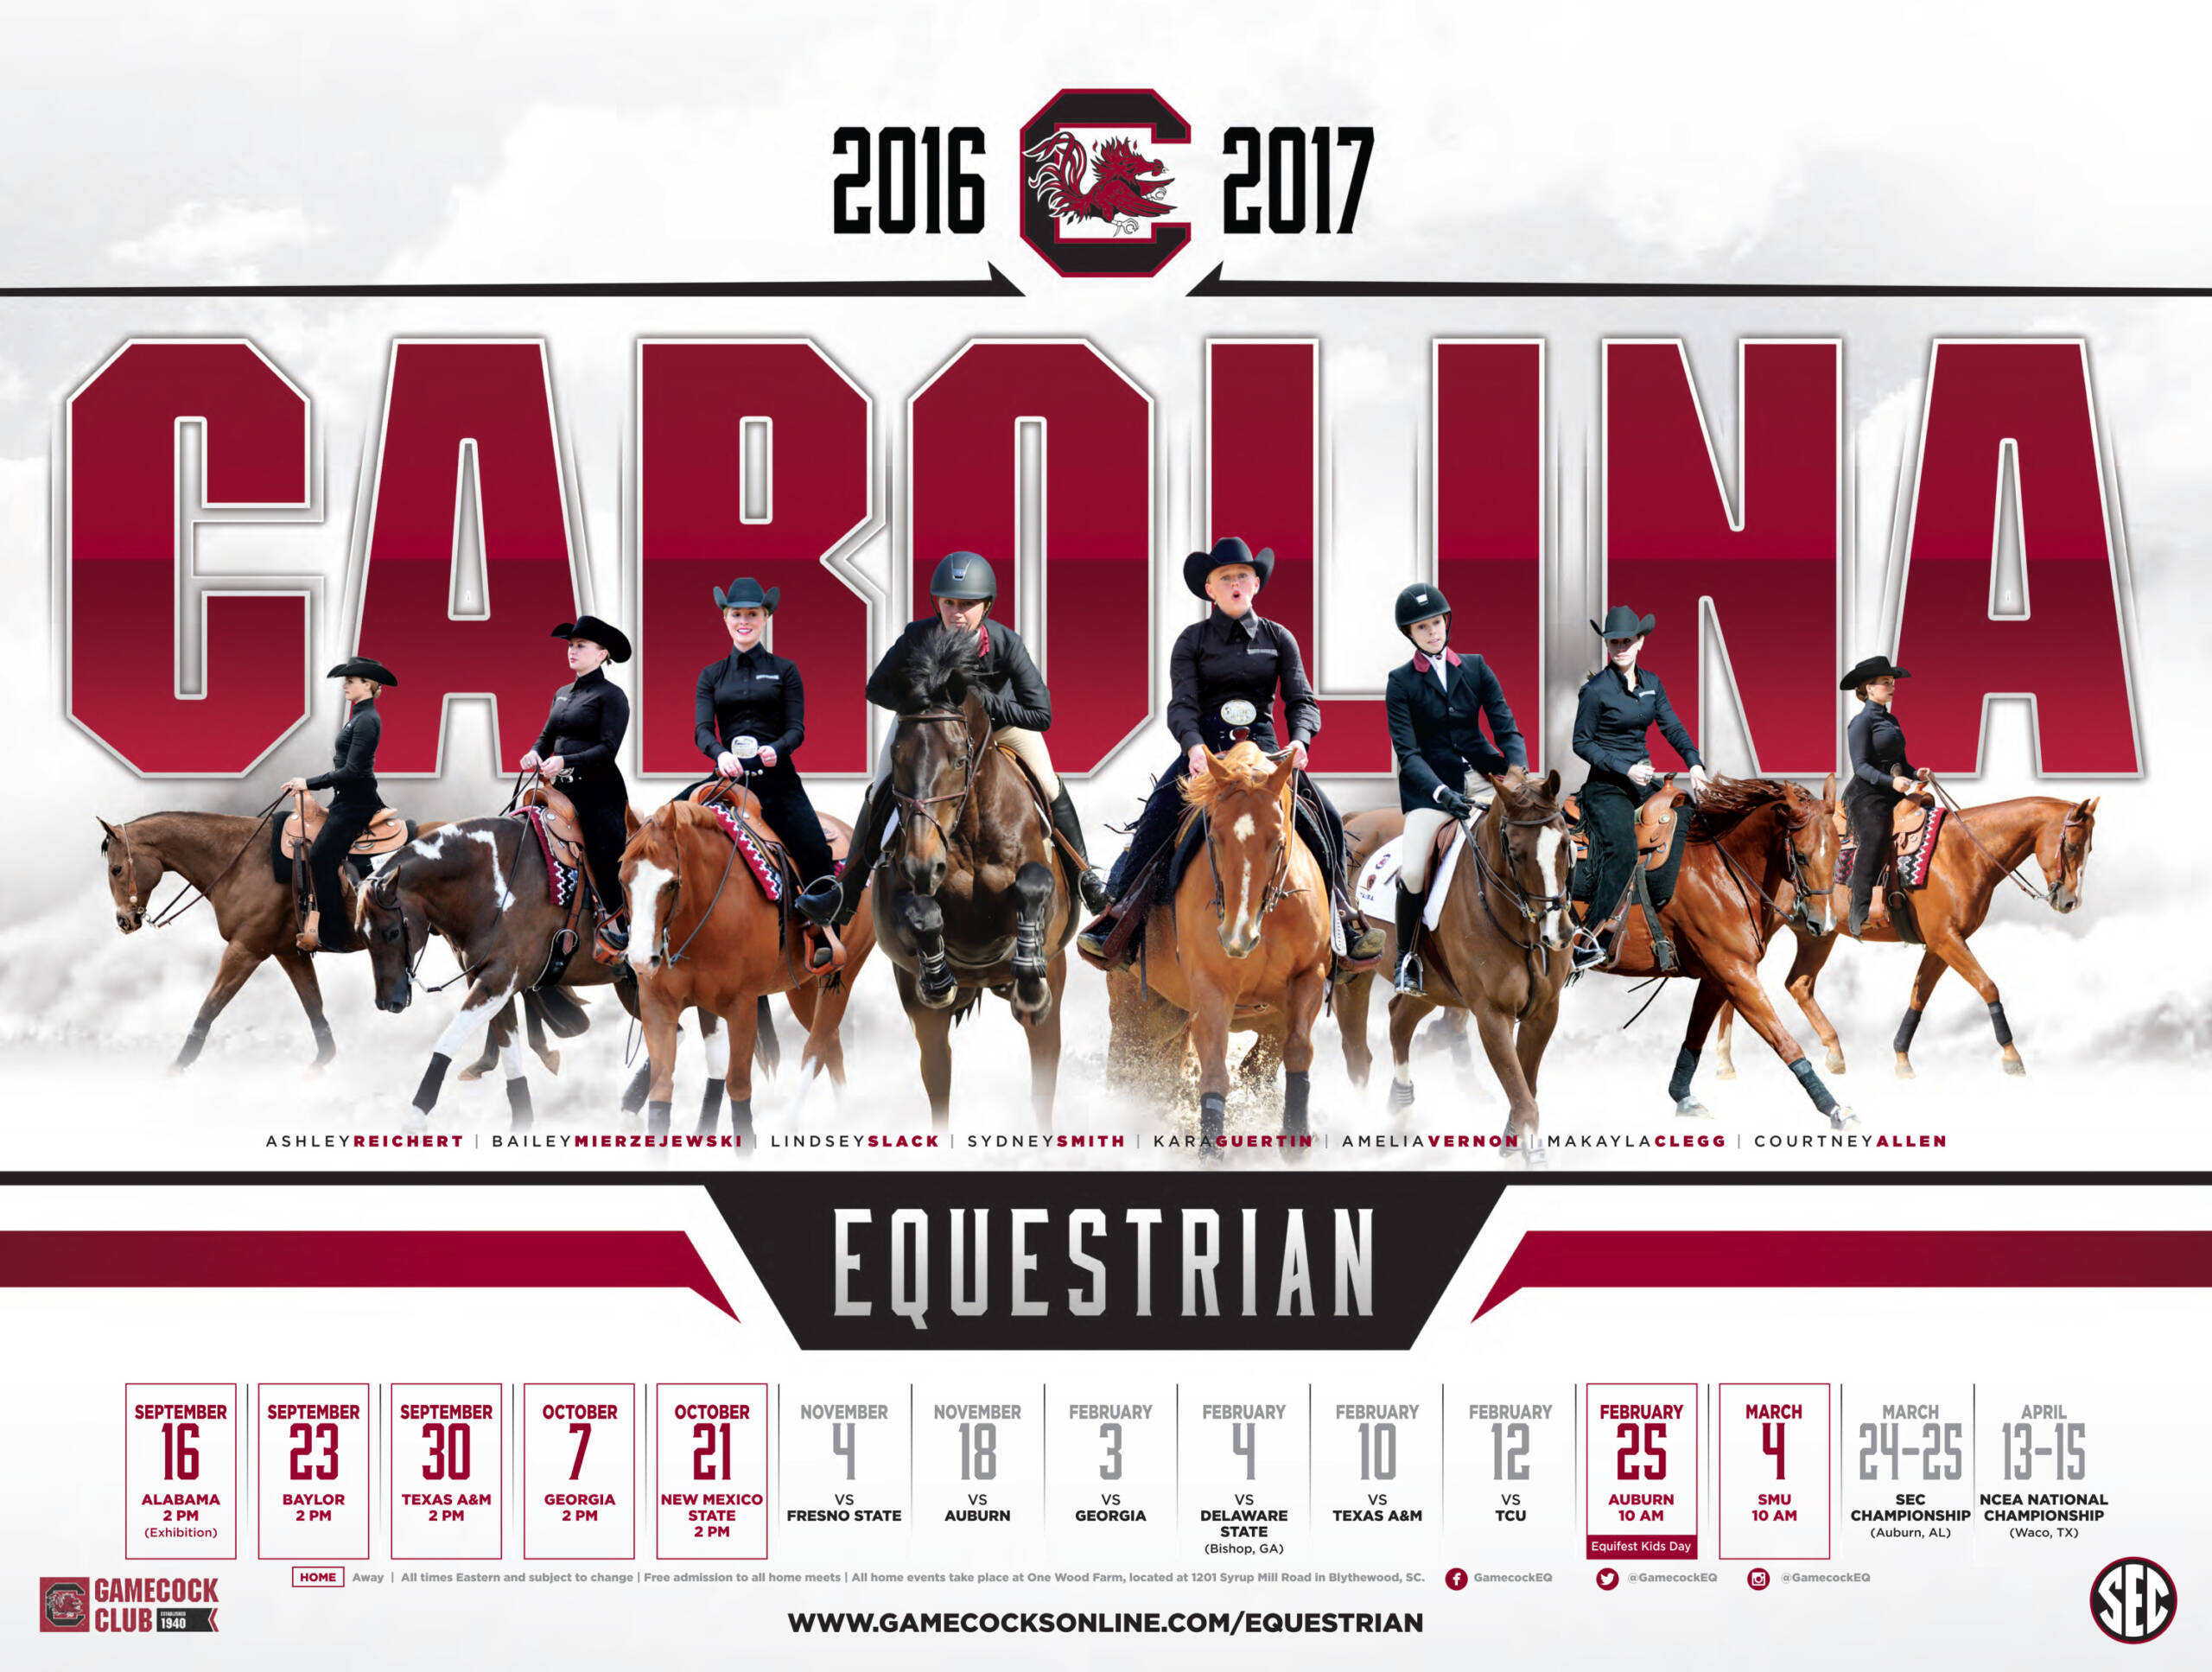 Gamecocks Release 2016-17 Schedule Poster